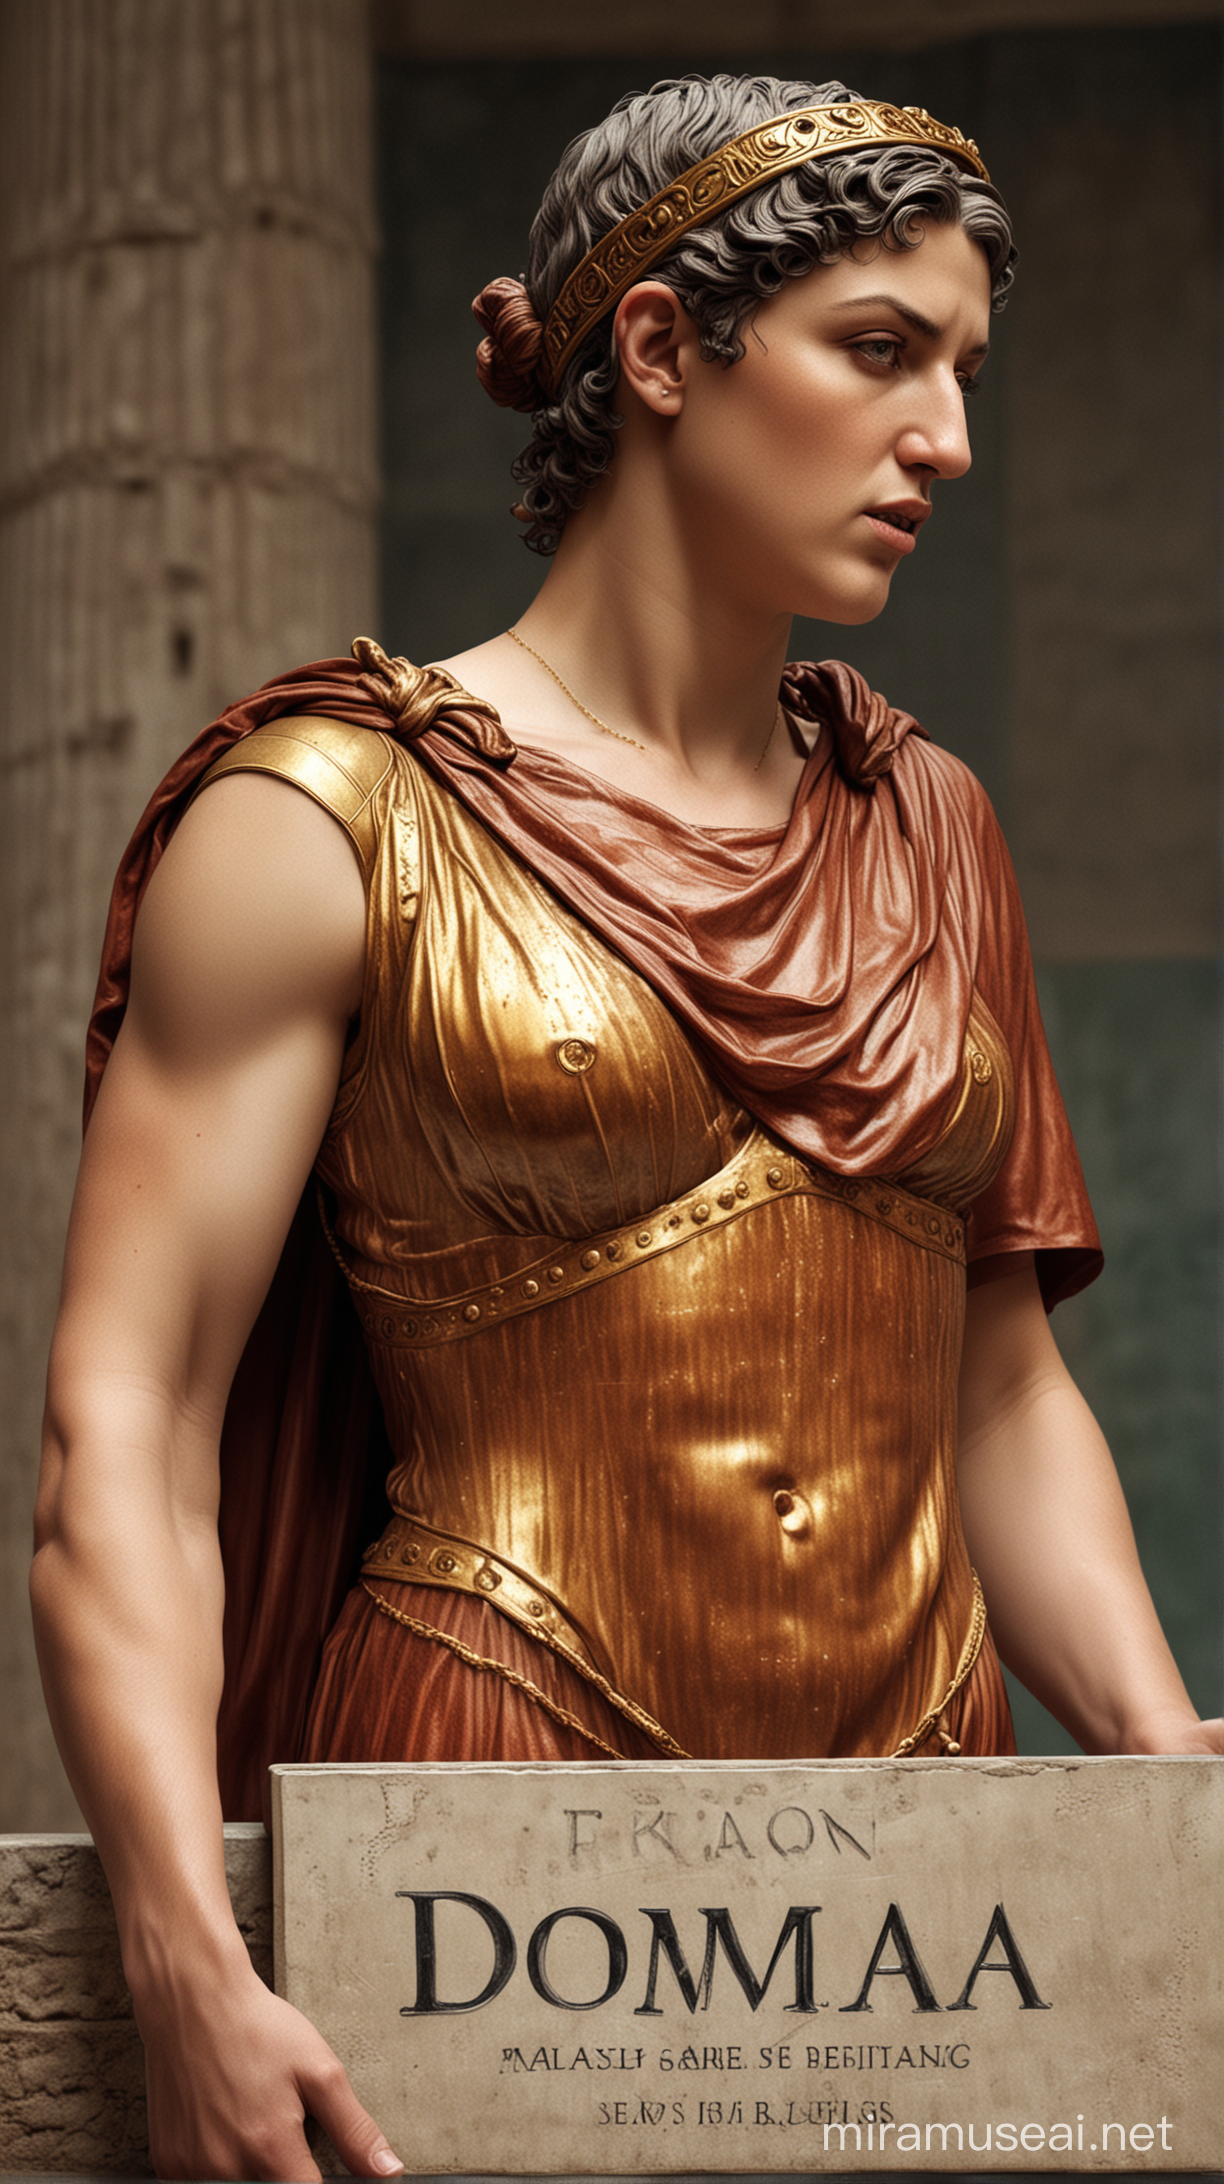 Picture of Elagabalus preferring to be addressed as "Domina" instead of "Domini," showcasing his gender identity. hyper realistic